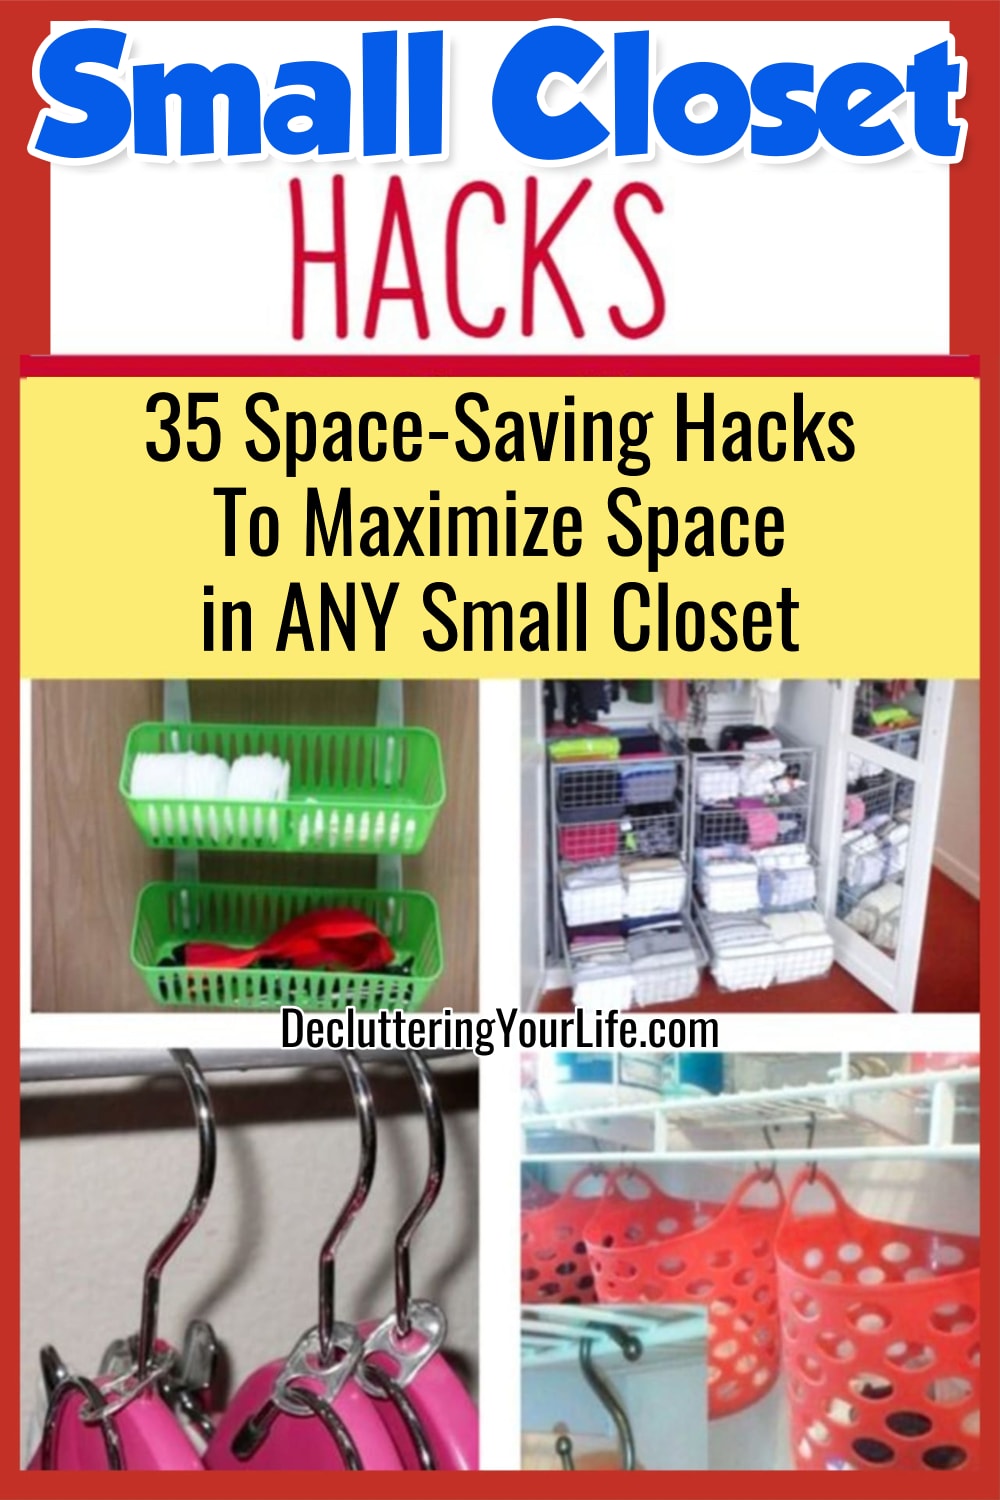 Small Closet Hacks - How To Maximize Space in a Small Closet on a Budget - Perfect for small apartment closets, dorm room closets or ANY small closet